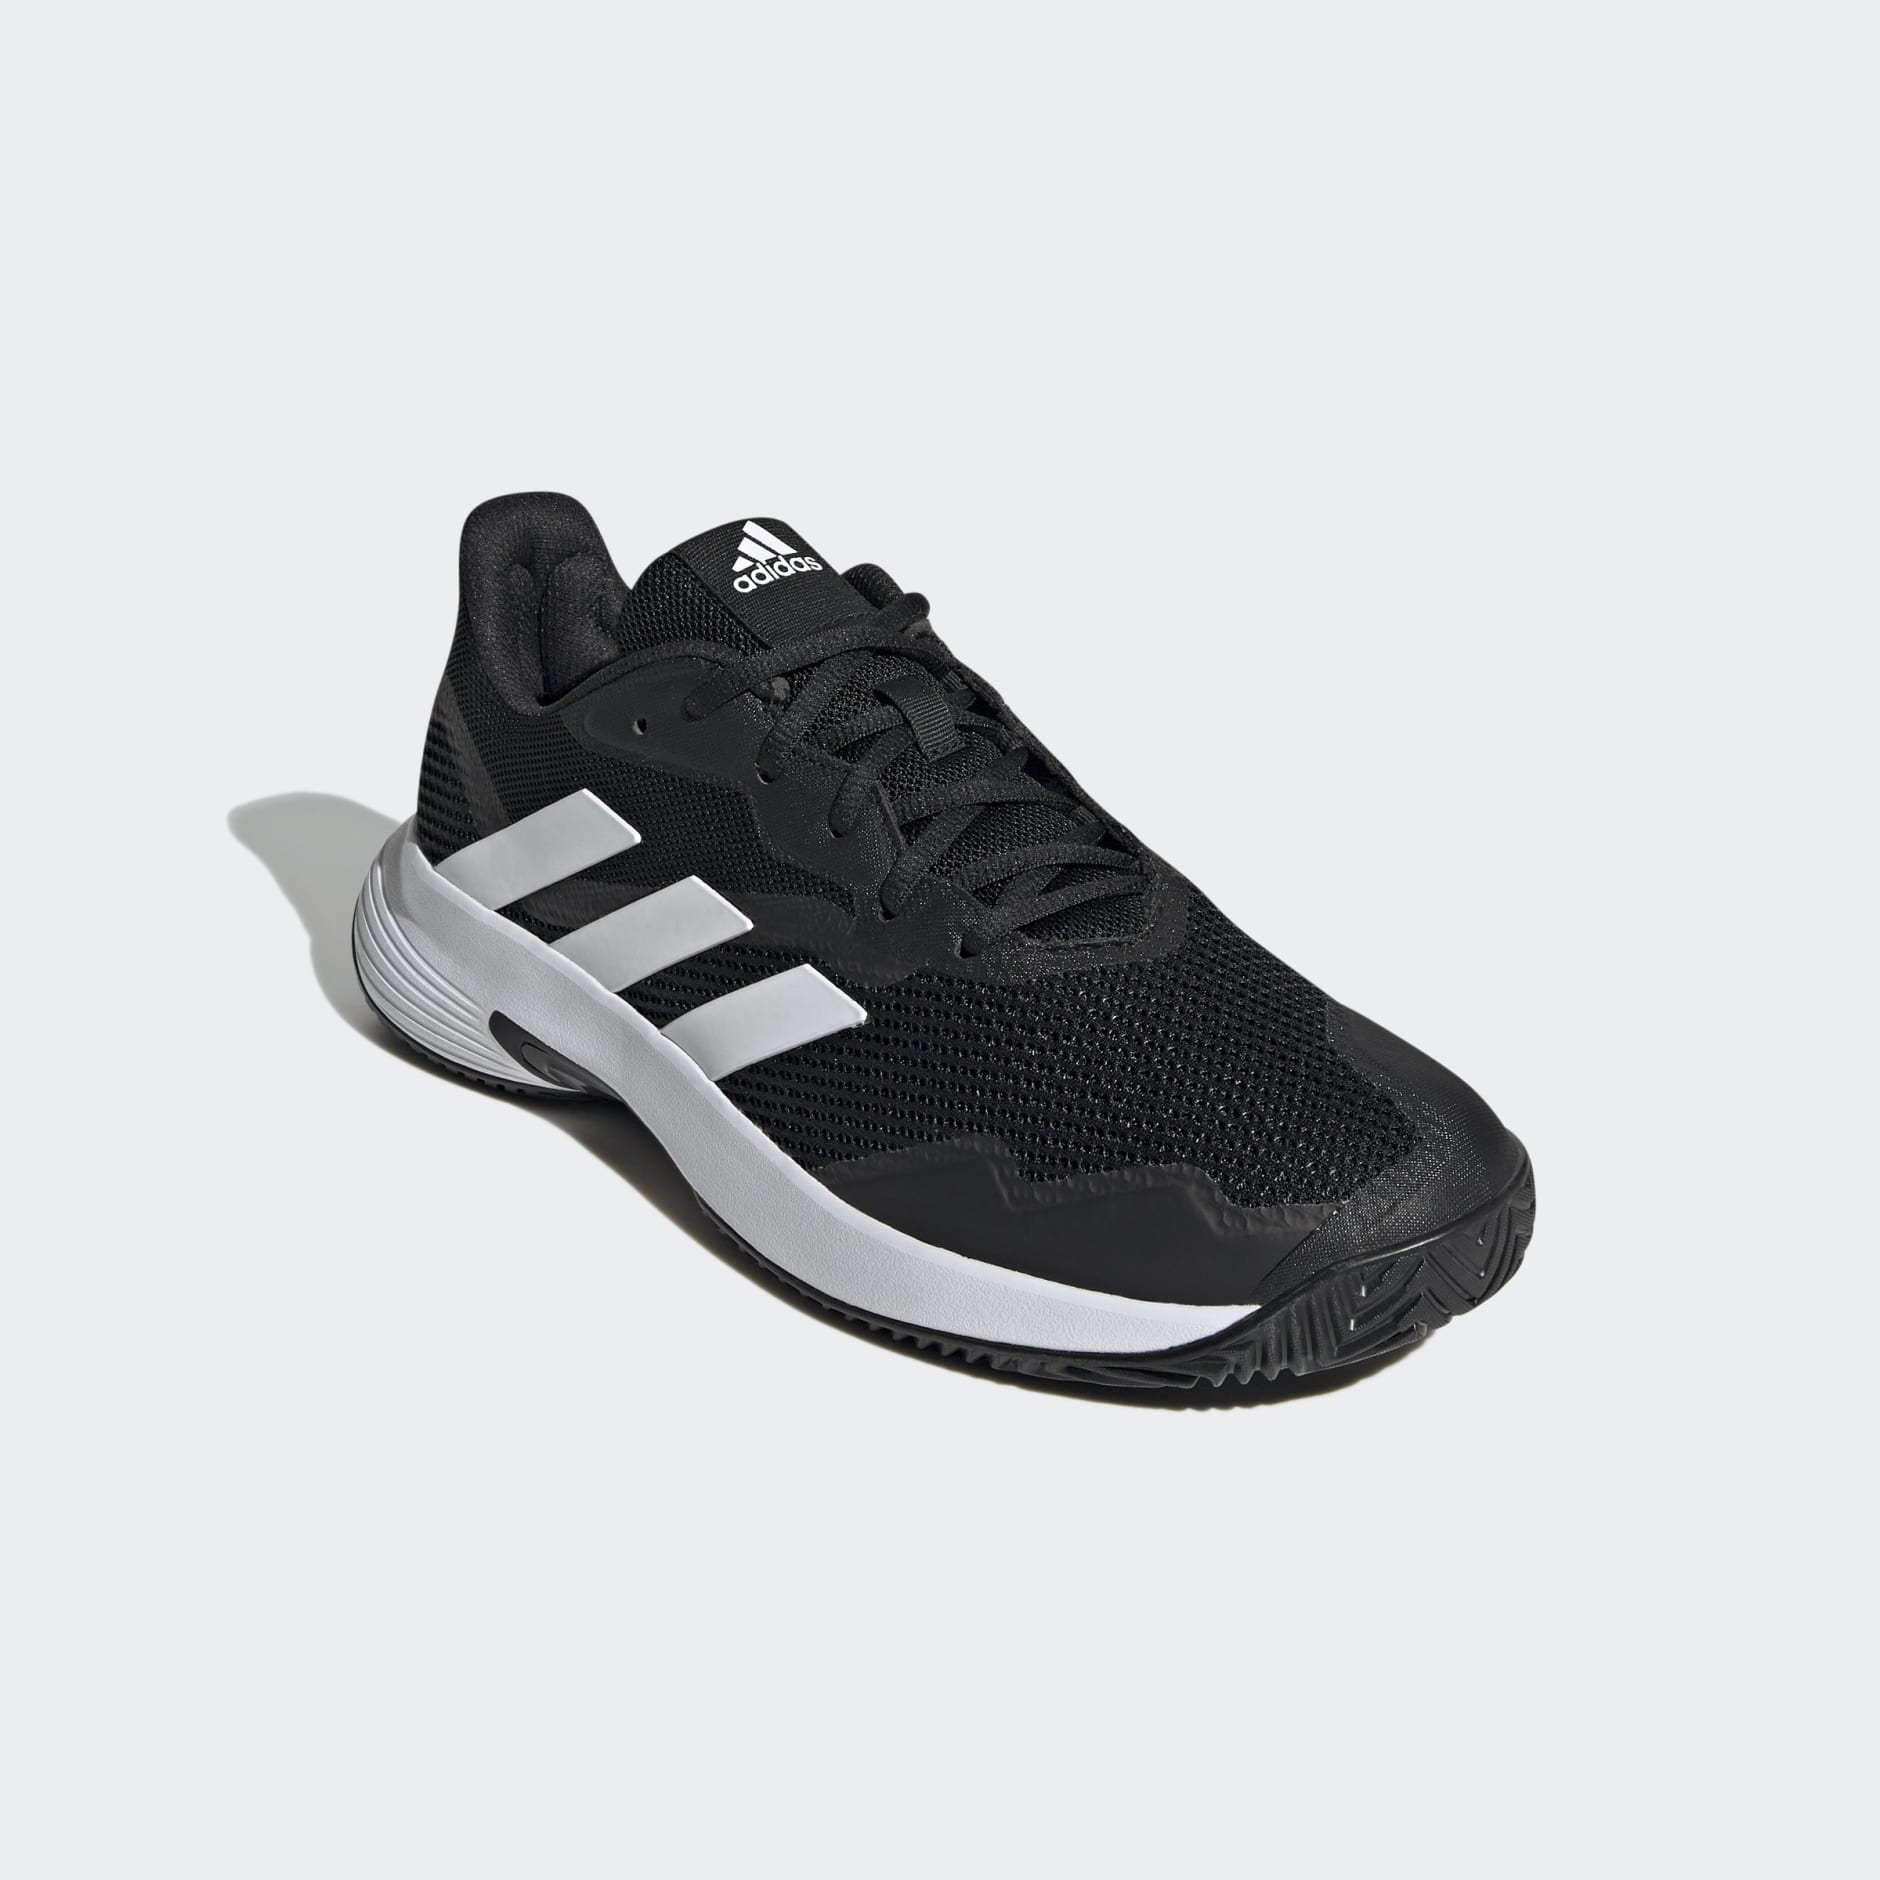 Shoes - Courtjam Control Tennis Shoes - Black | adidas South Africa